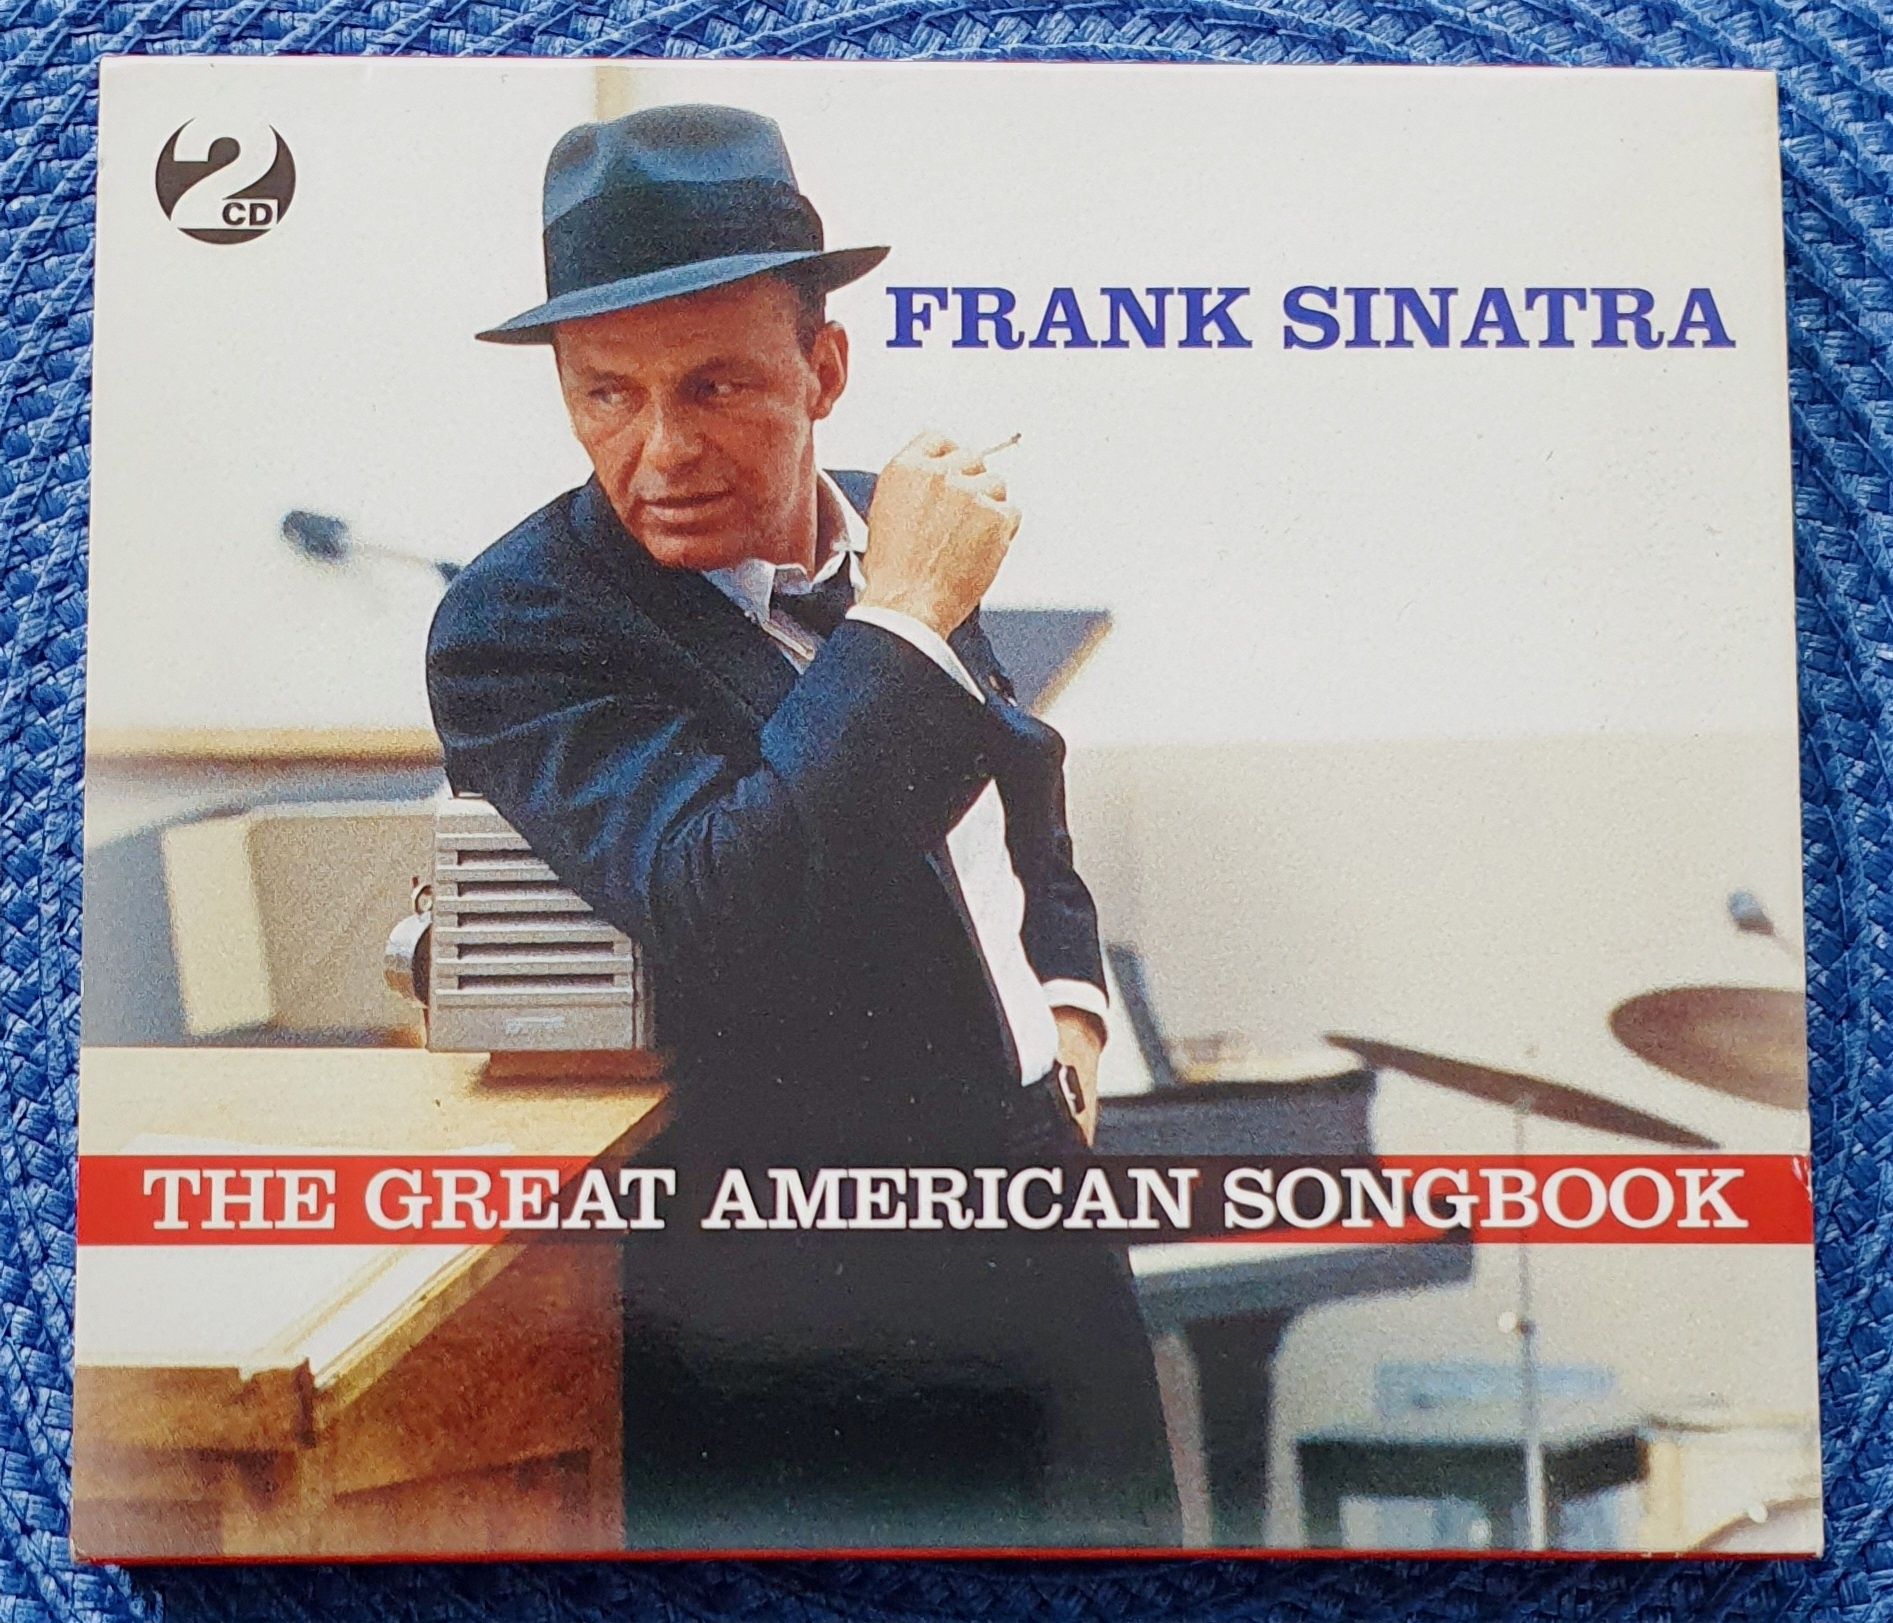 Frank Sinatra - The Great American Songbook x1 CD